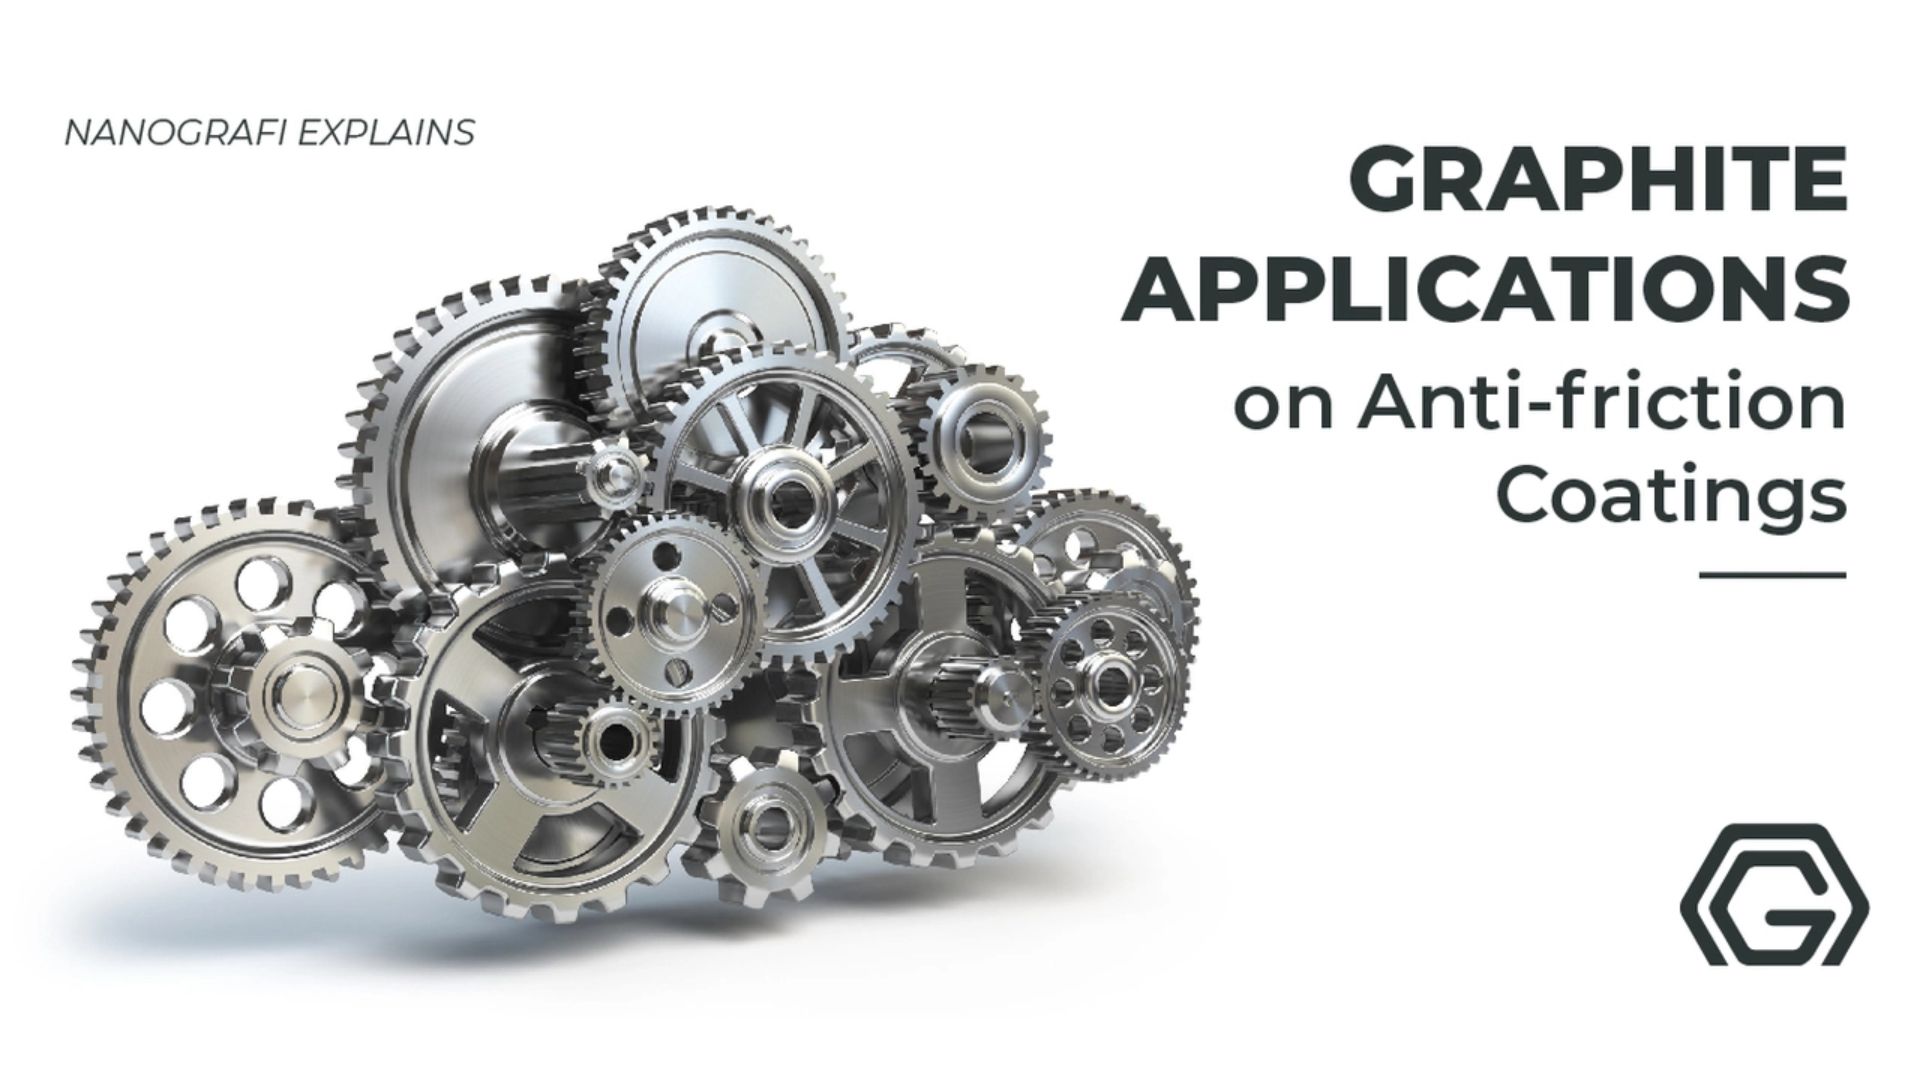 Graphite applications on anti-friction coatings